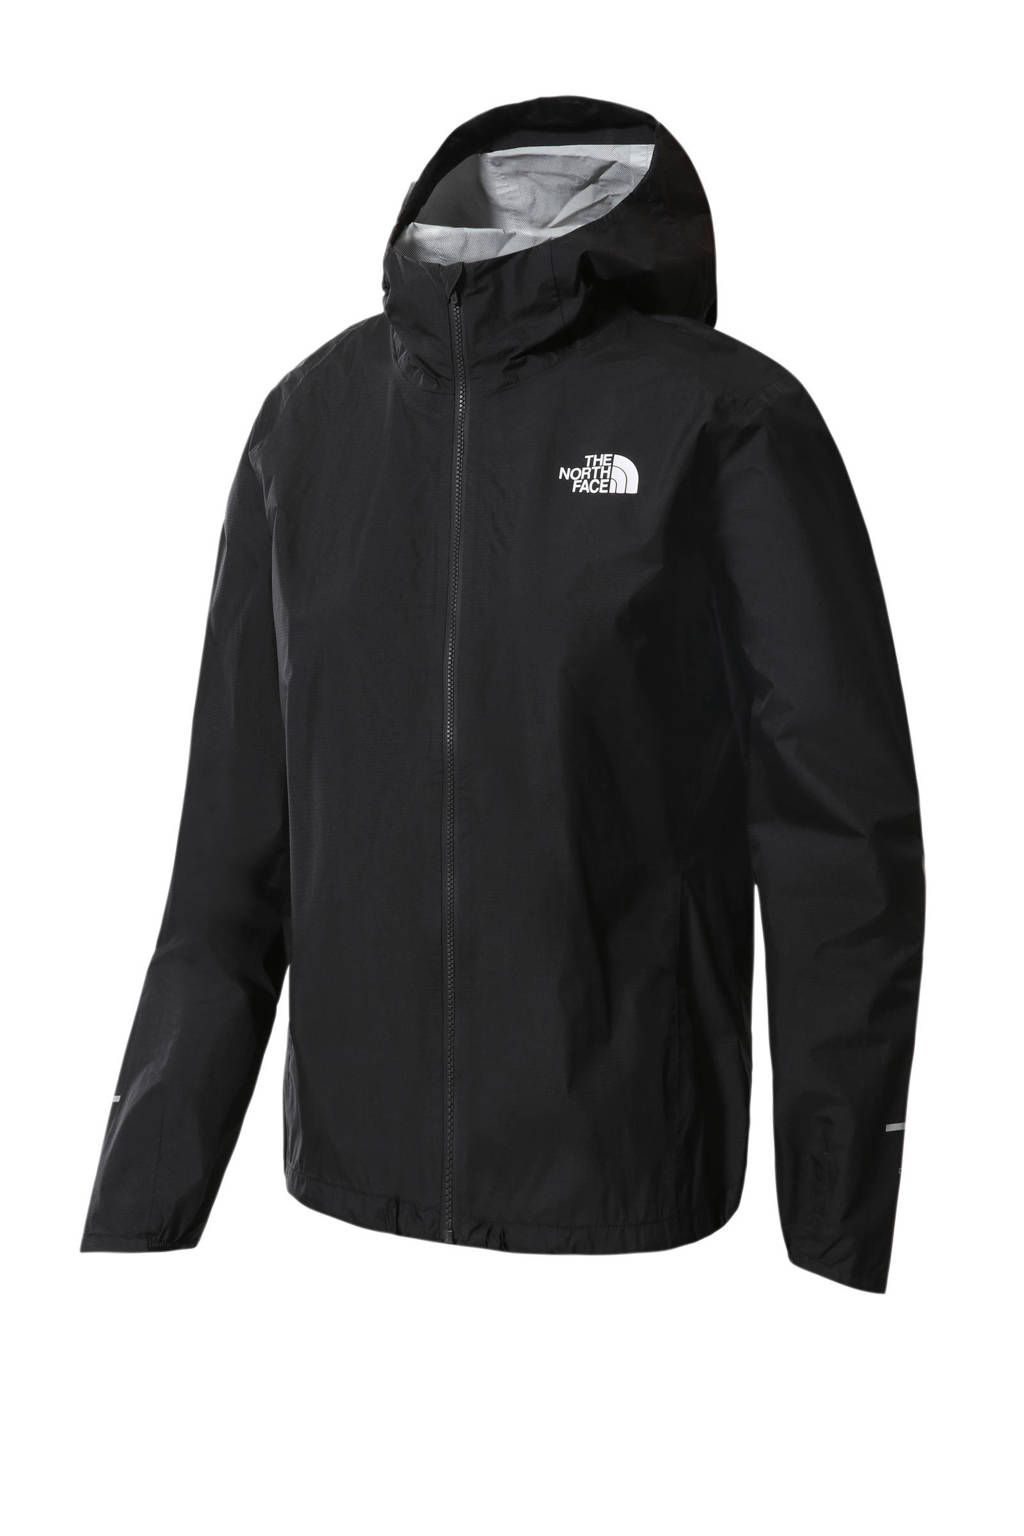 The North Face outdoor jas First Down Packable zwart